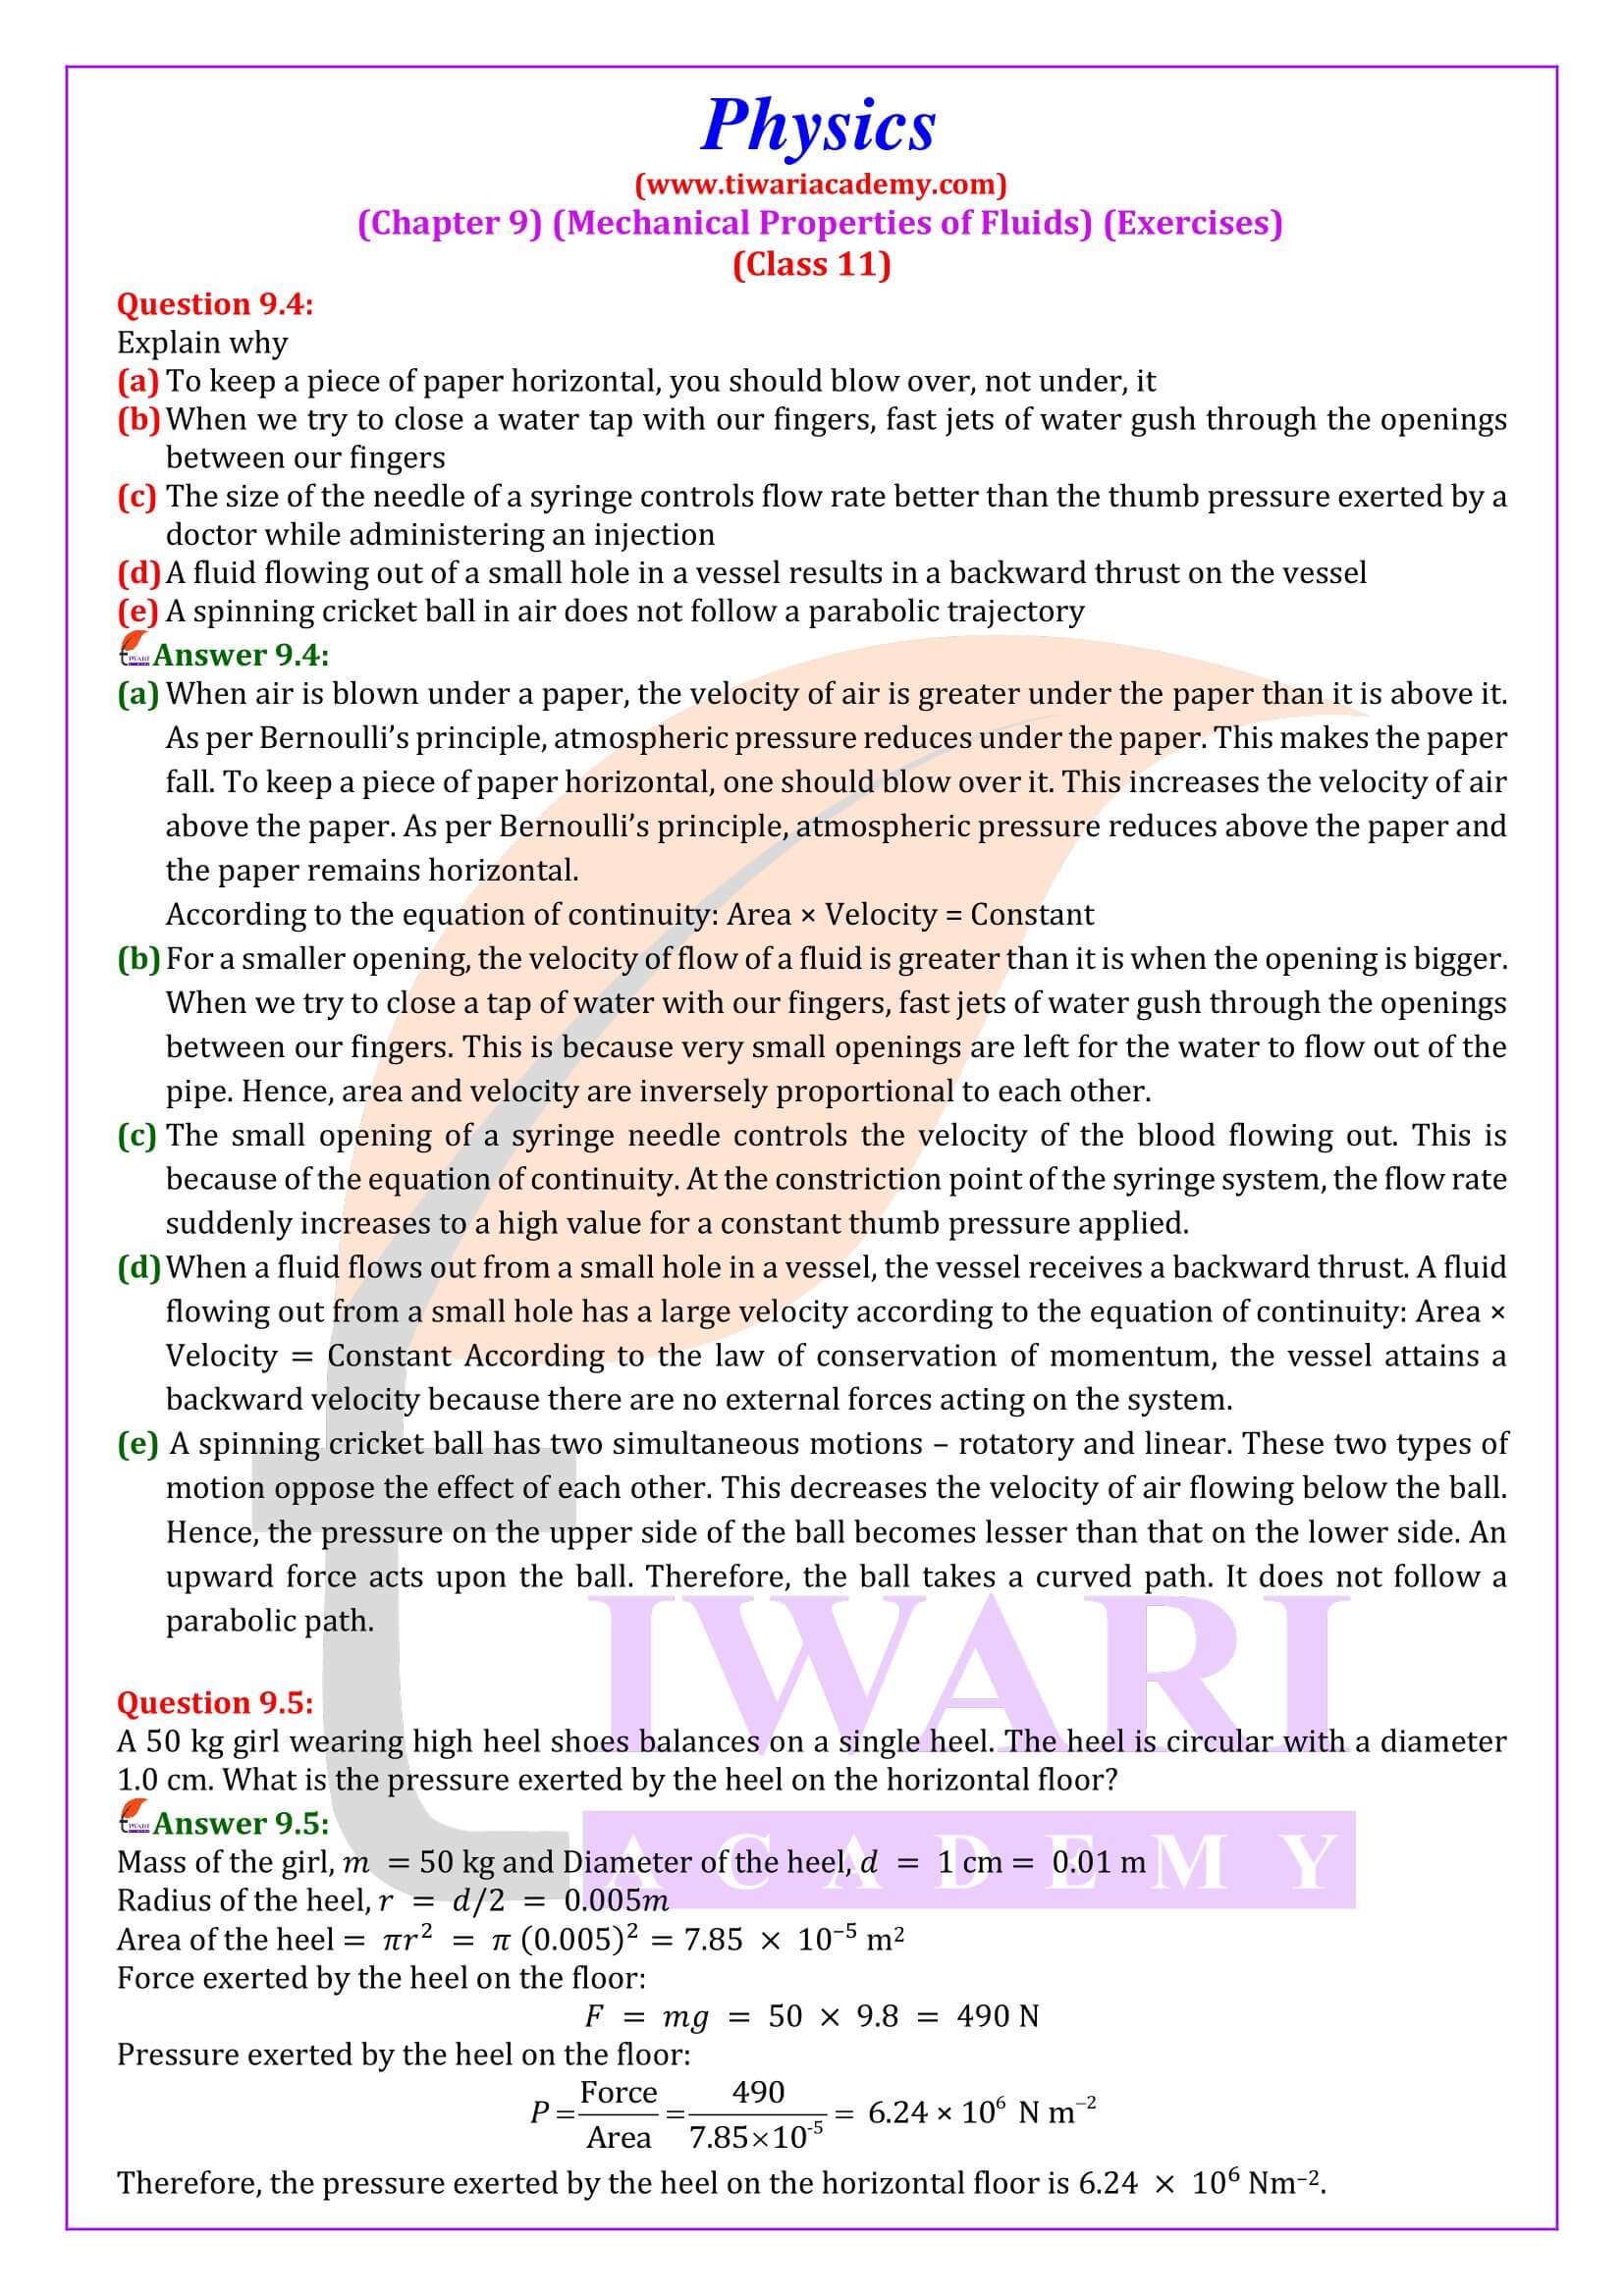 NCERT Solutions for Class 11 Physics Chapter 9 in English Medium